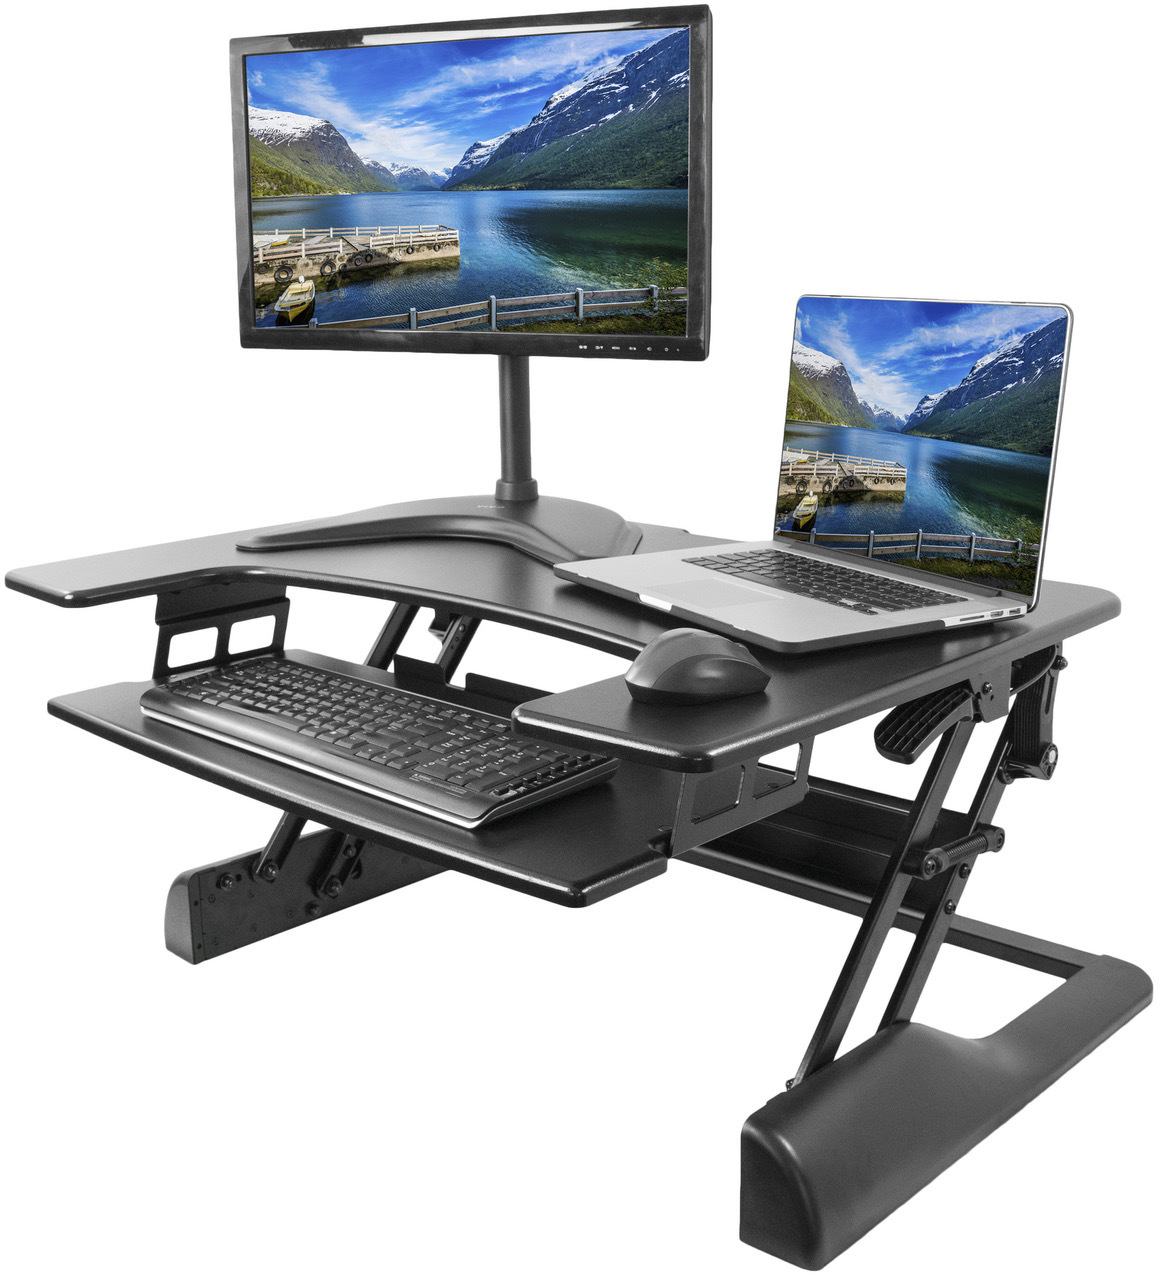 Standing Desk: Why All the Hype